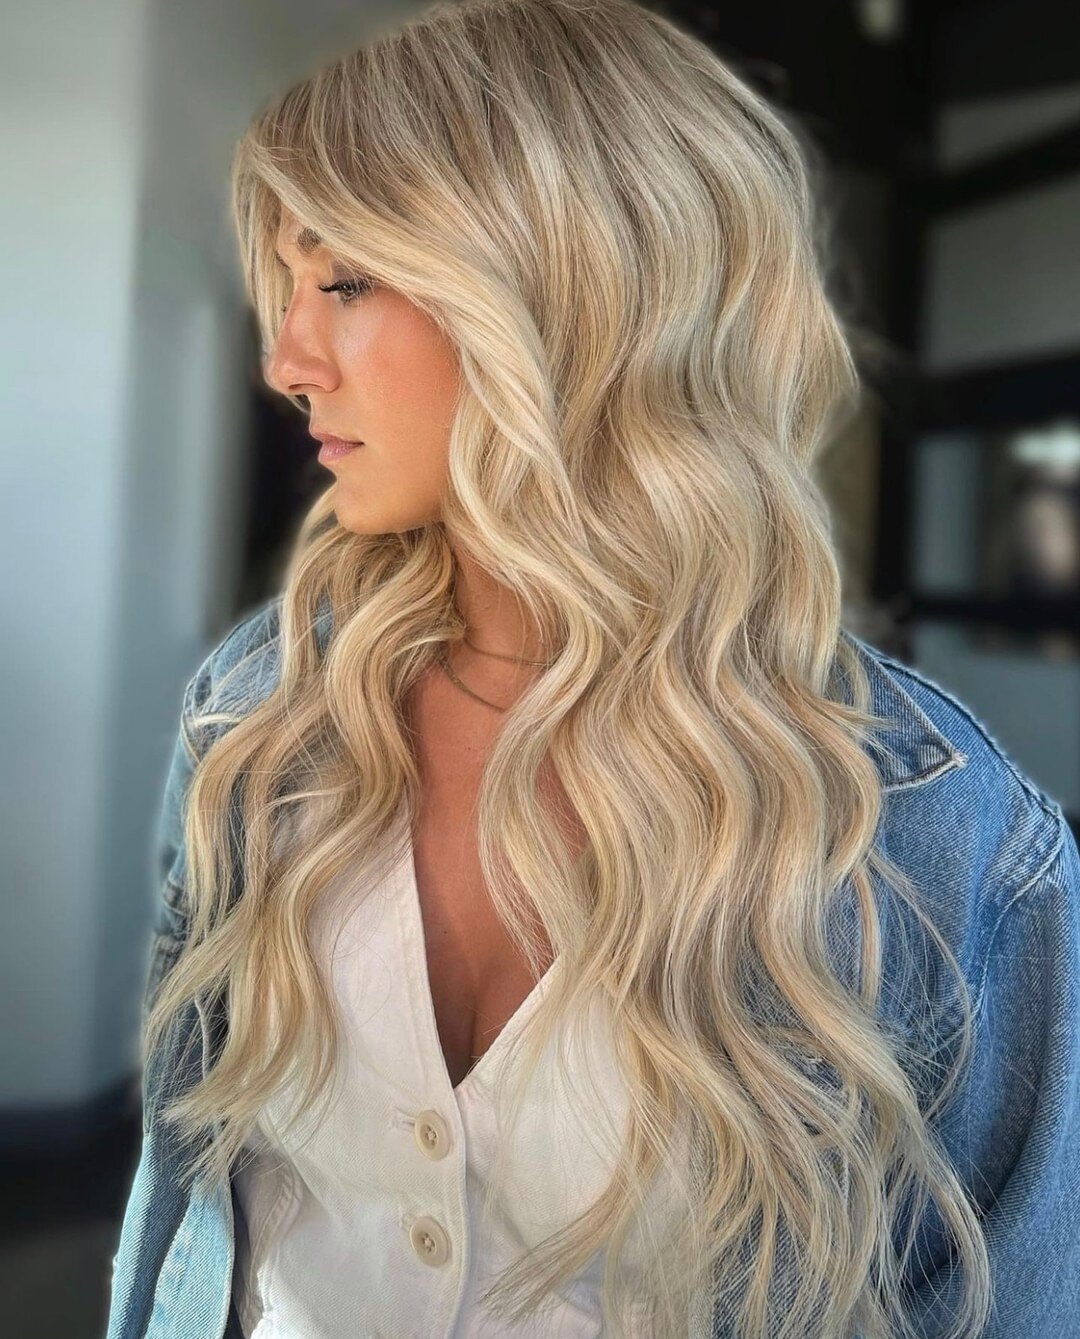 We are loving all of the blonde shades for summer ✨⁠
⁠
stylist: @victoria.hautebeautystudio